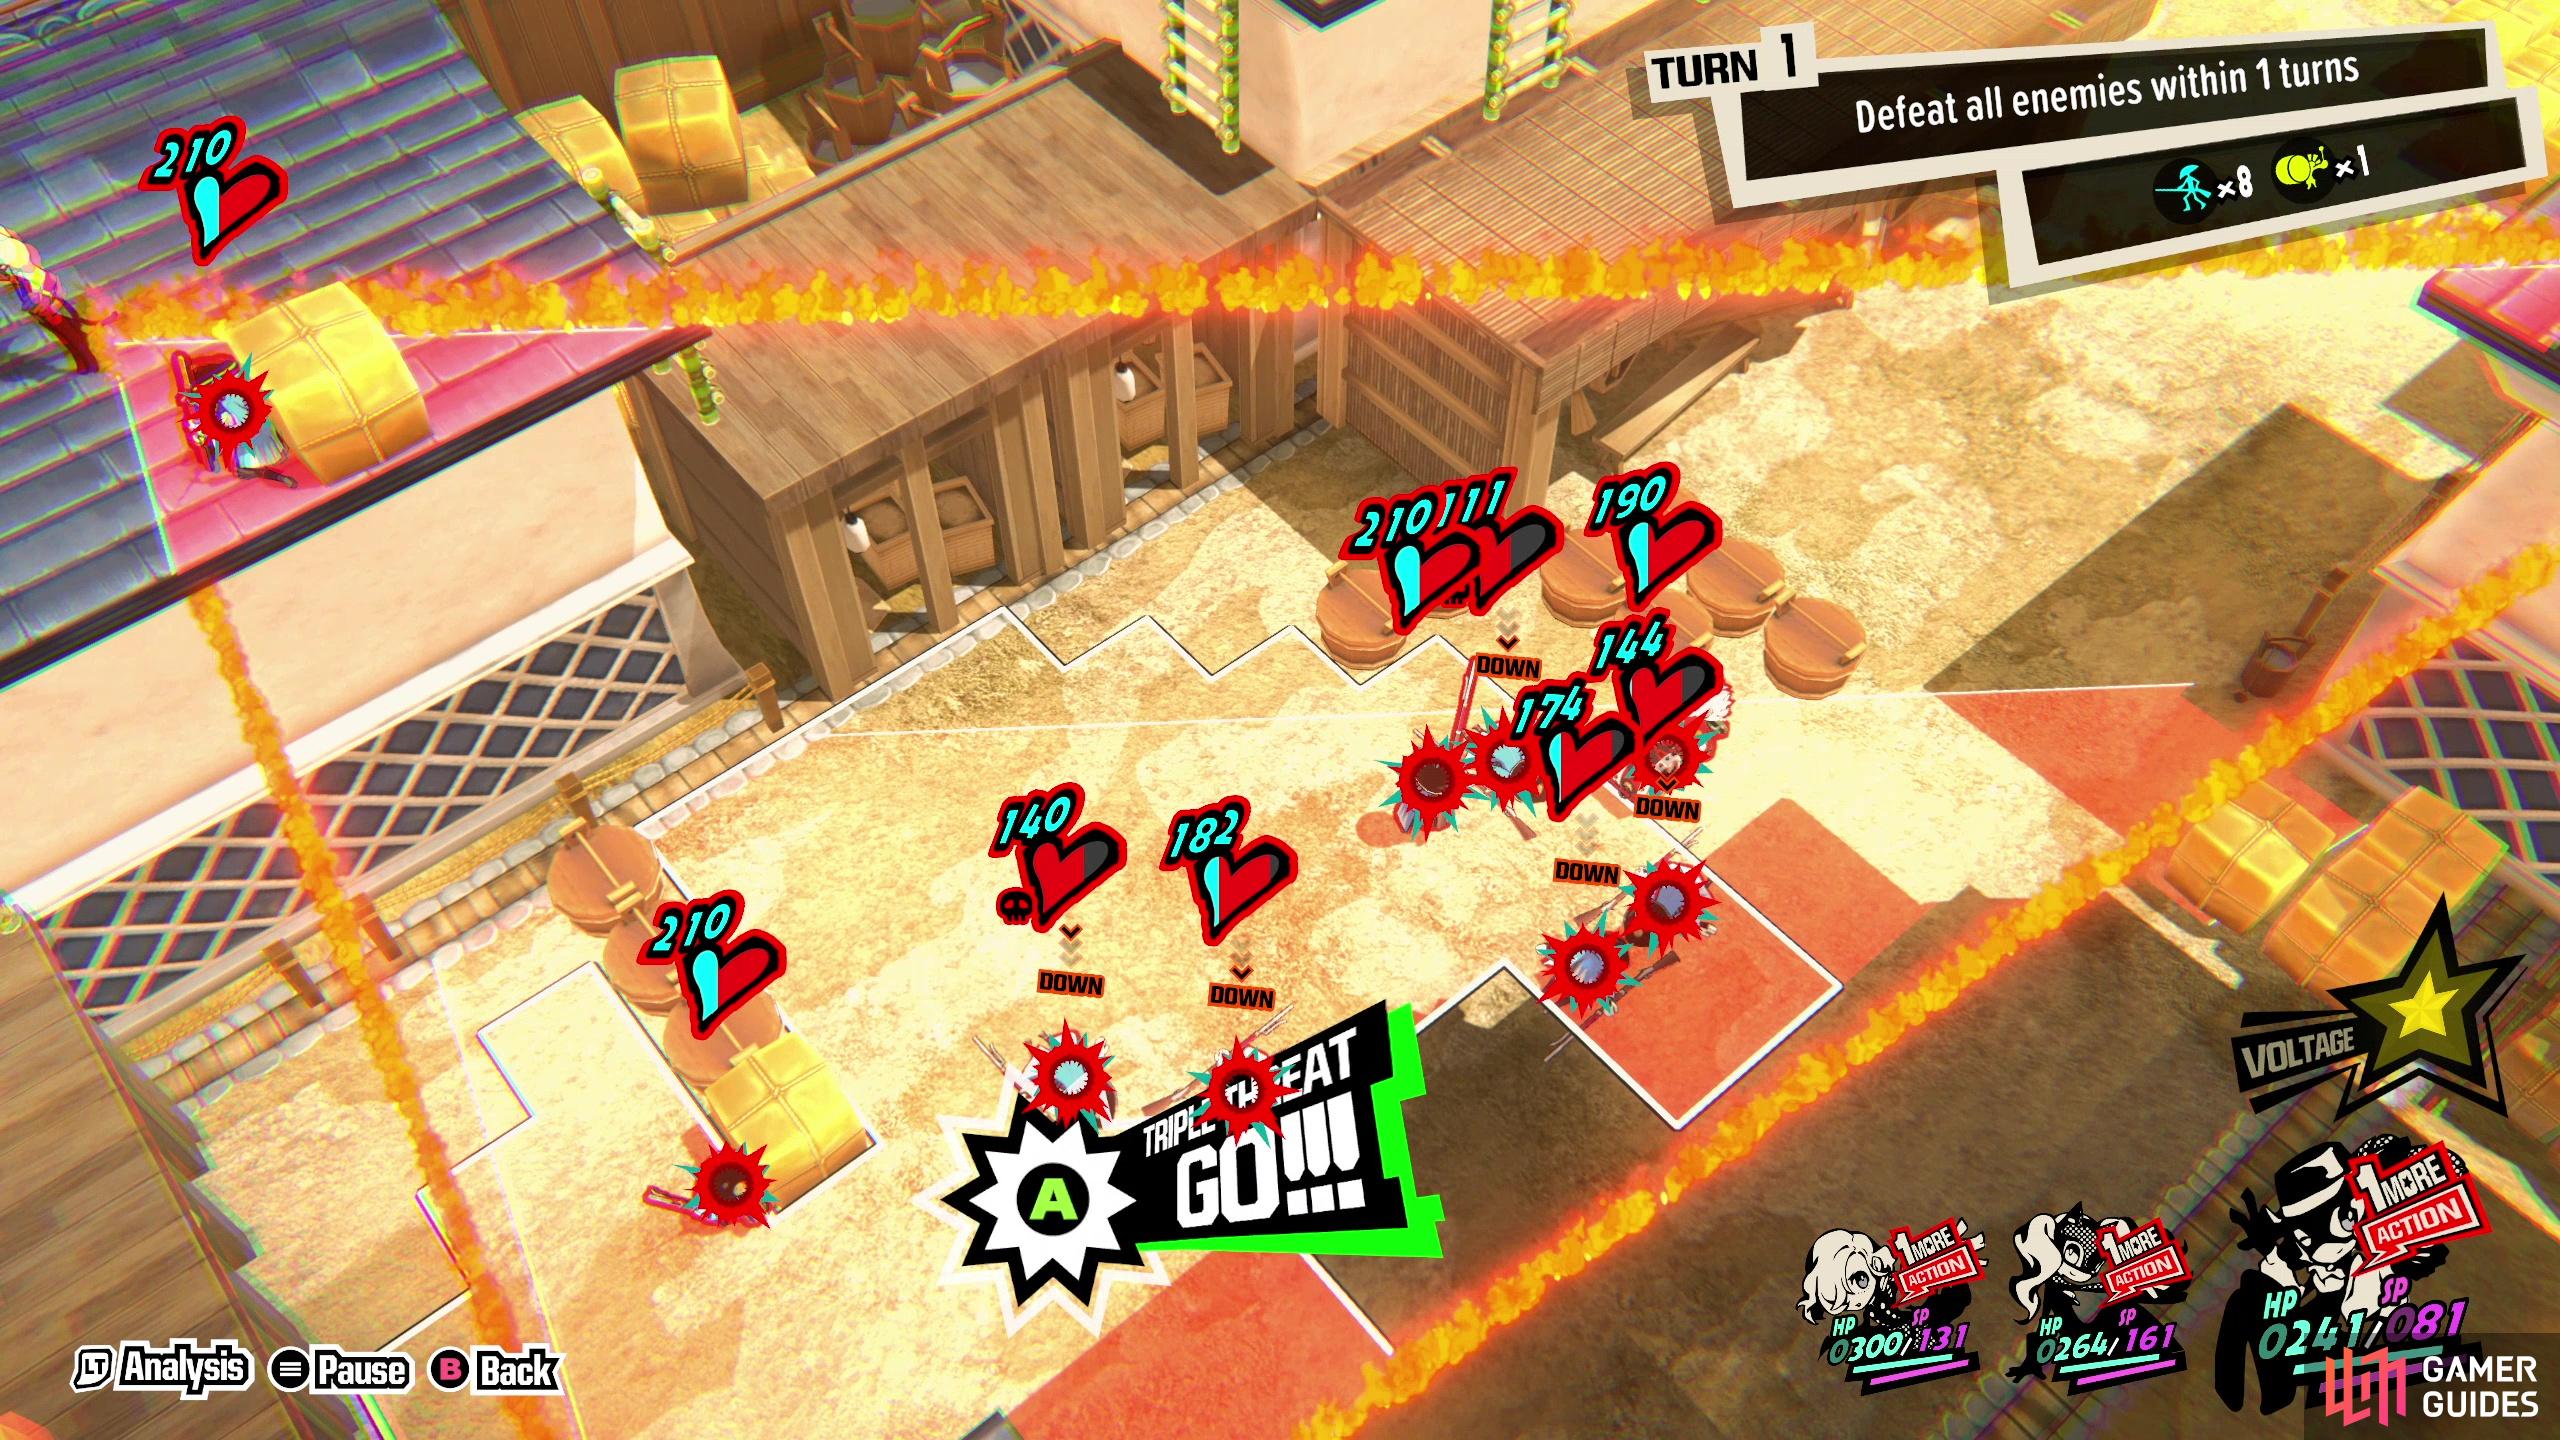 Reposition Haru and check again - when every enemy is within the Triple Threat area, execute two of them to finish the map.